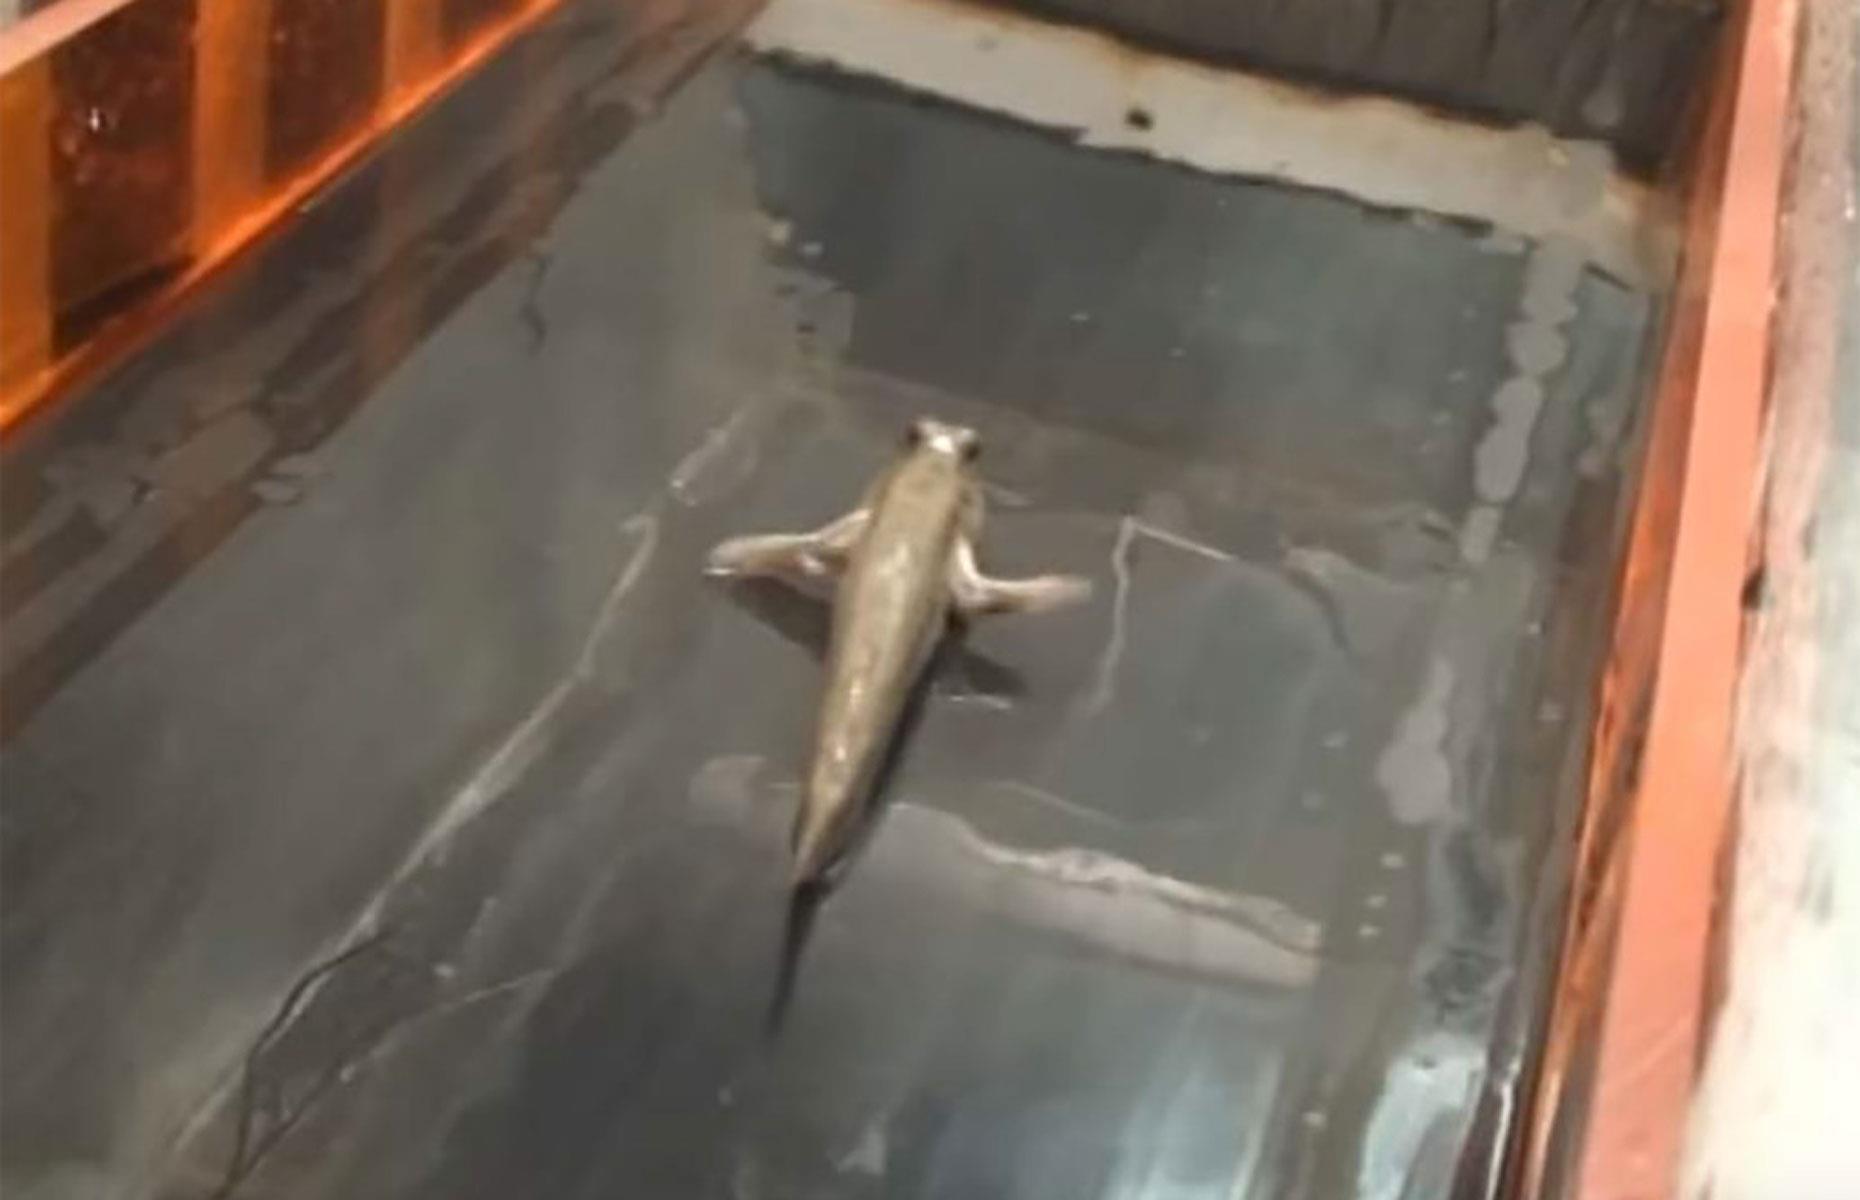 Research to ascertain how long fish can run on a treadmill: $560,000